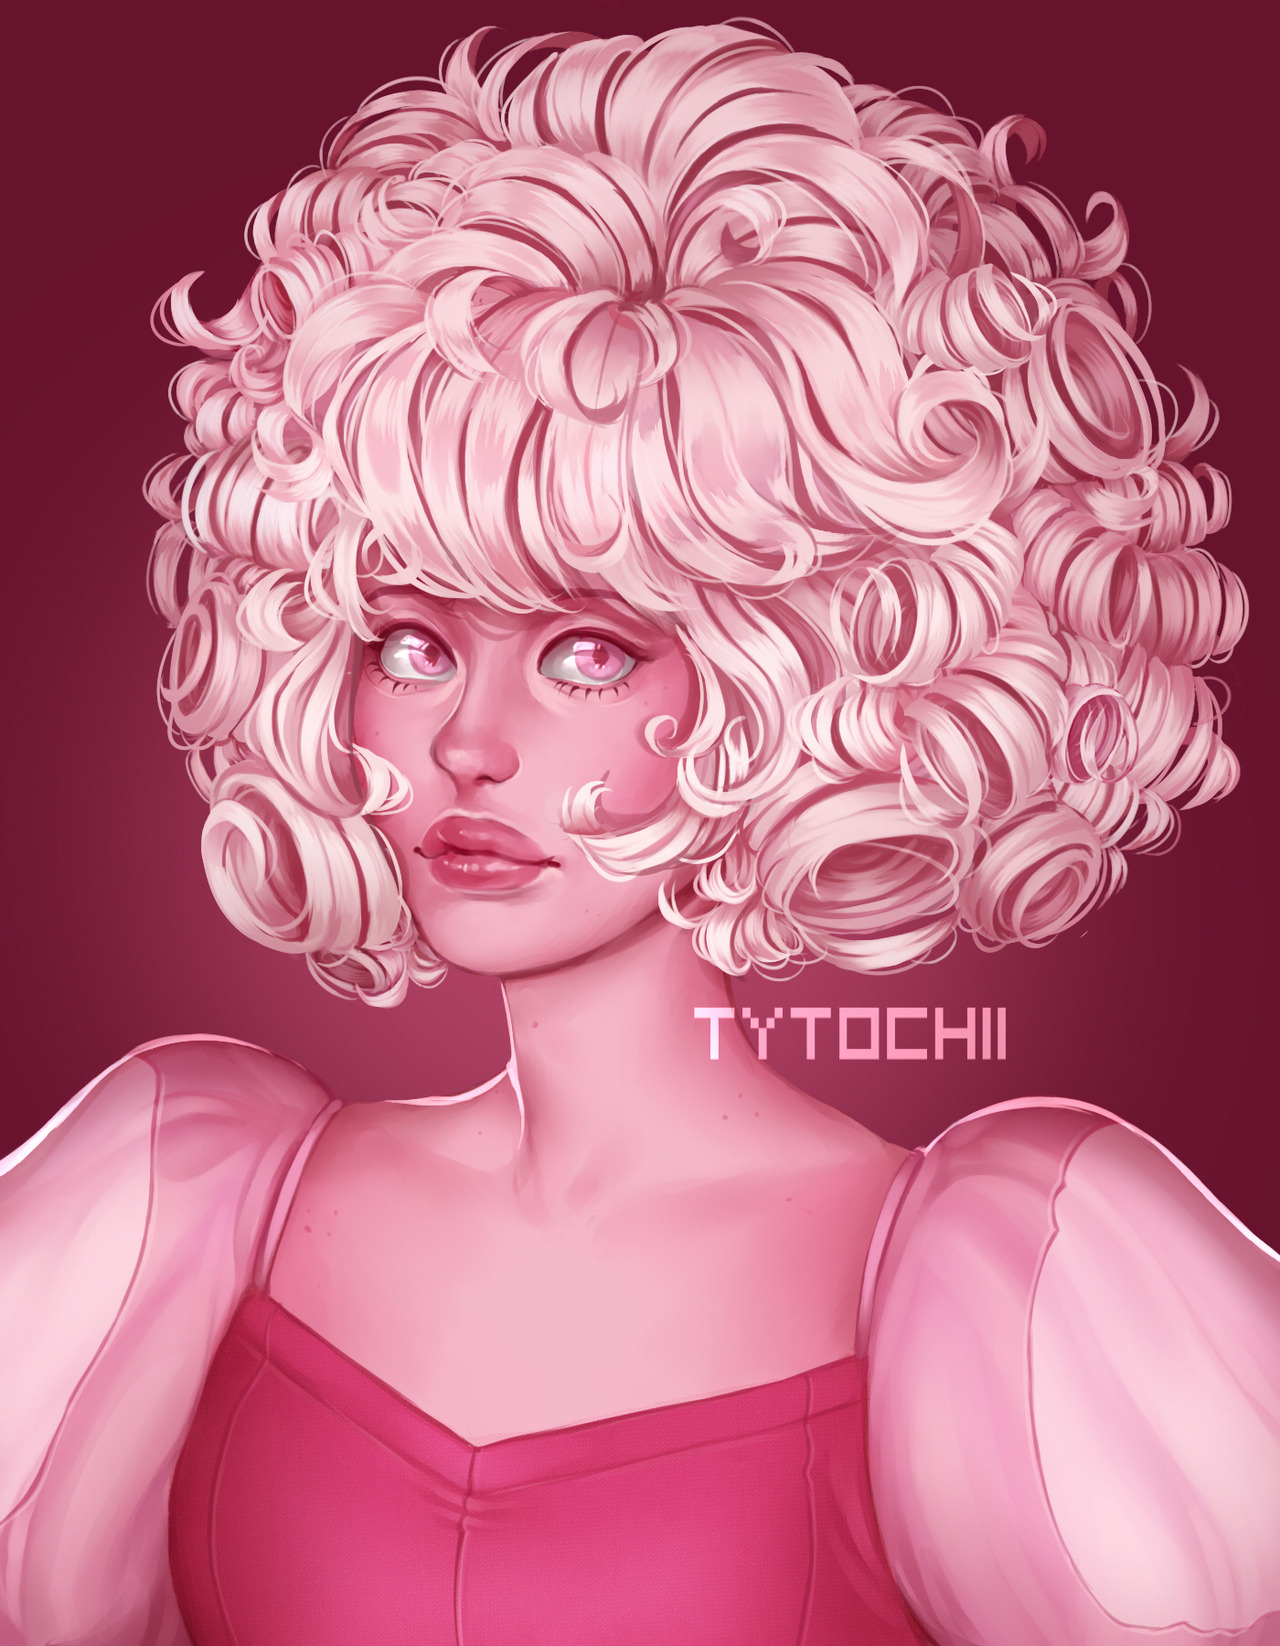 Finished Pink Diamond drawing! Aa I can’t express how much I love her